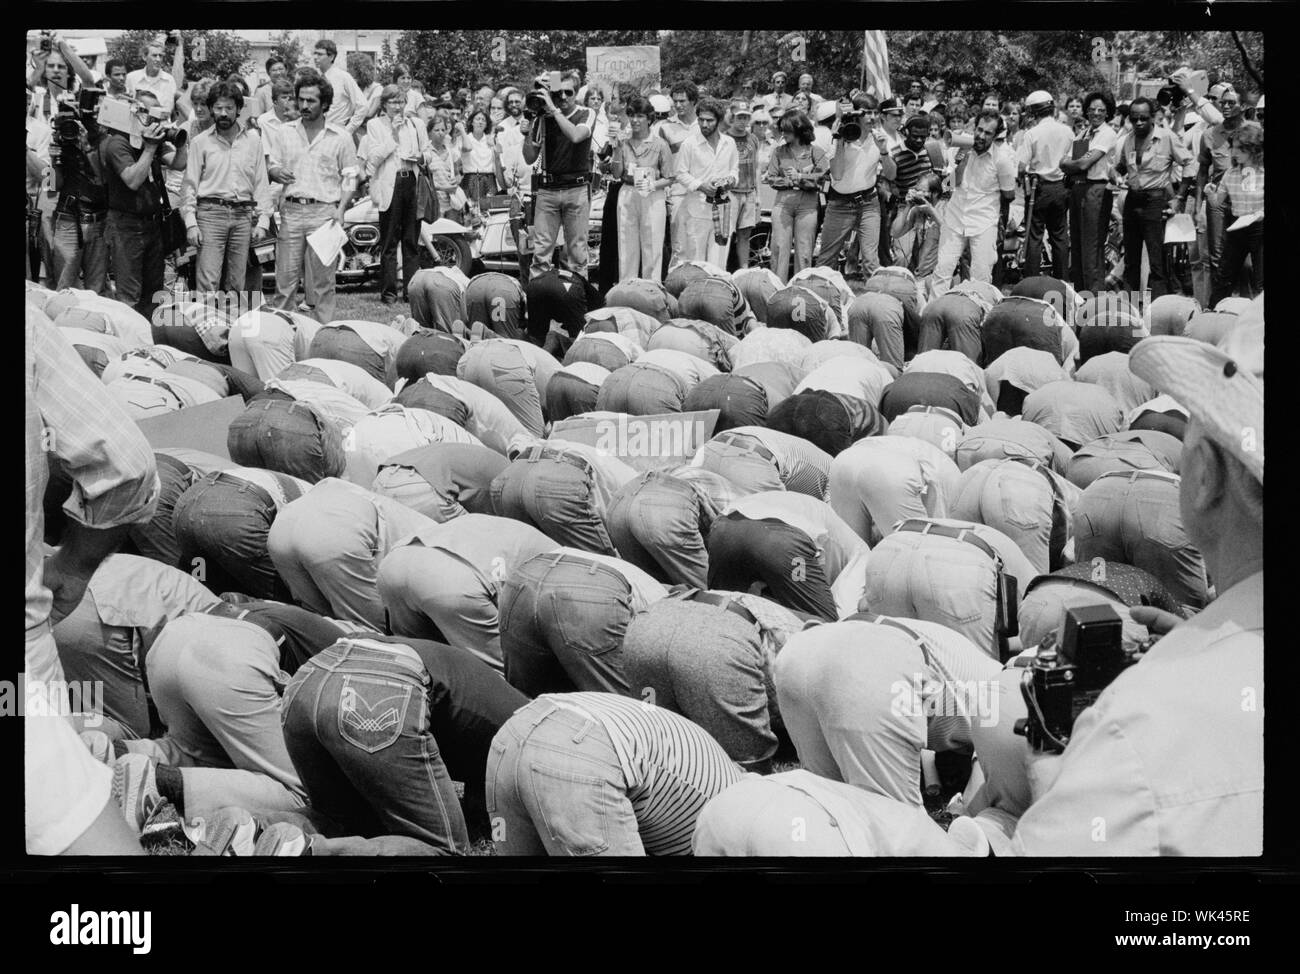 Iranian men bow in prayer during demonstration for Khomeini in Washington, D.C.;  Iranian men bow in prayer during demonstration for Khomeini in Washington, D.C. Stock Photo